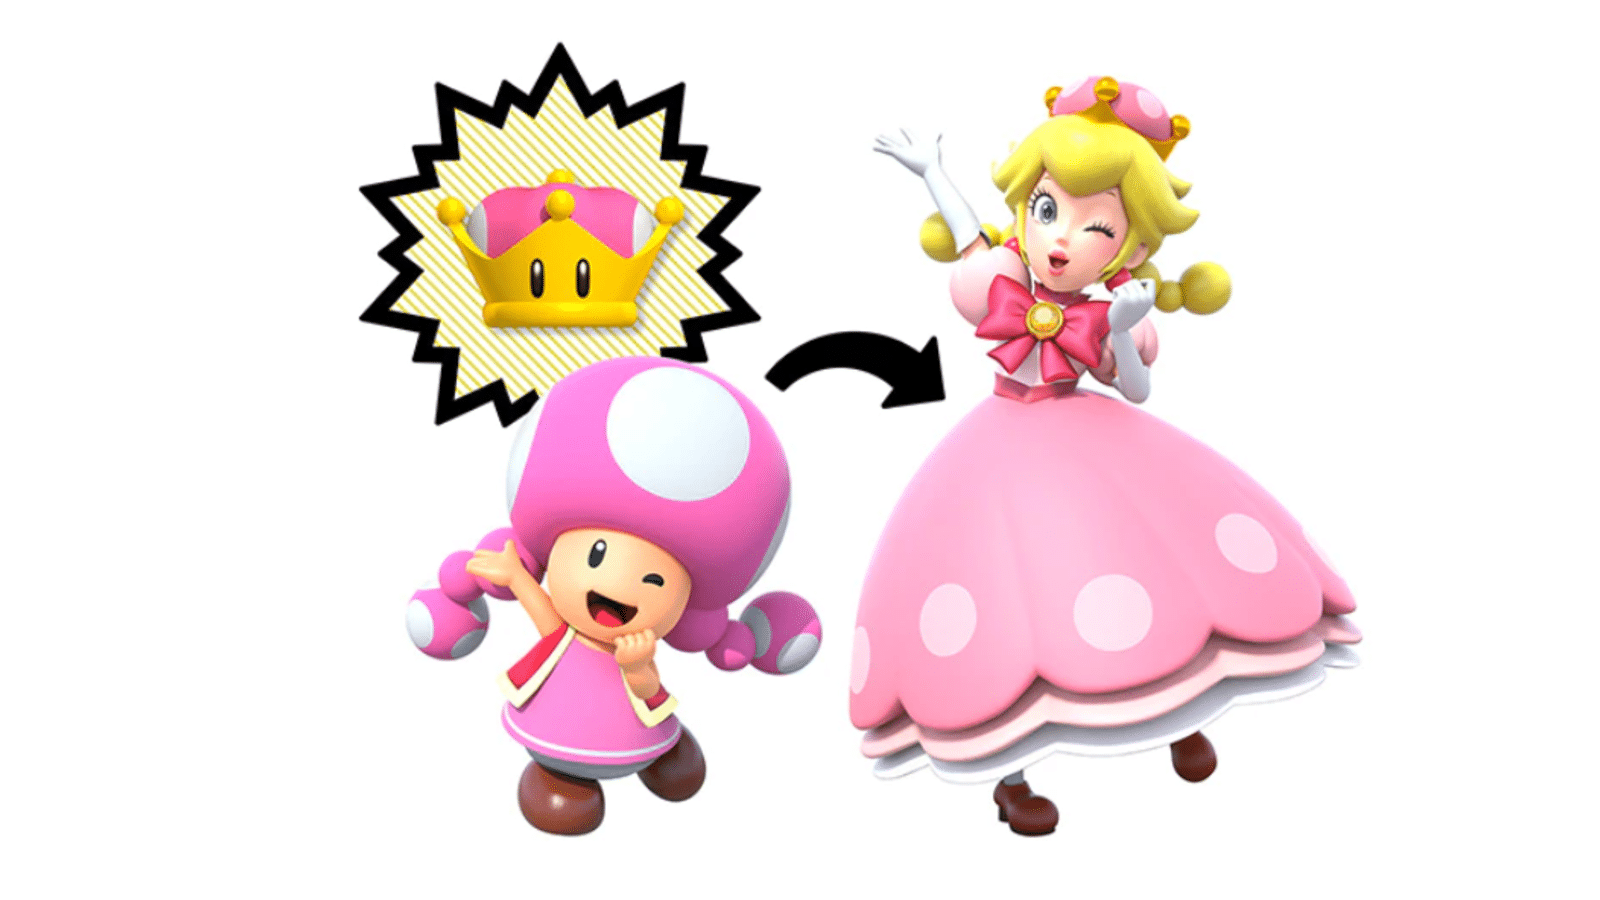 Super Crown affects only Toadette In New Super Mario Bros. U Deluxe